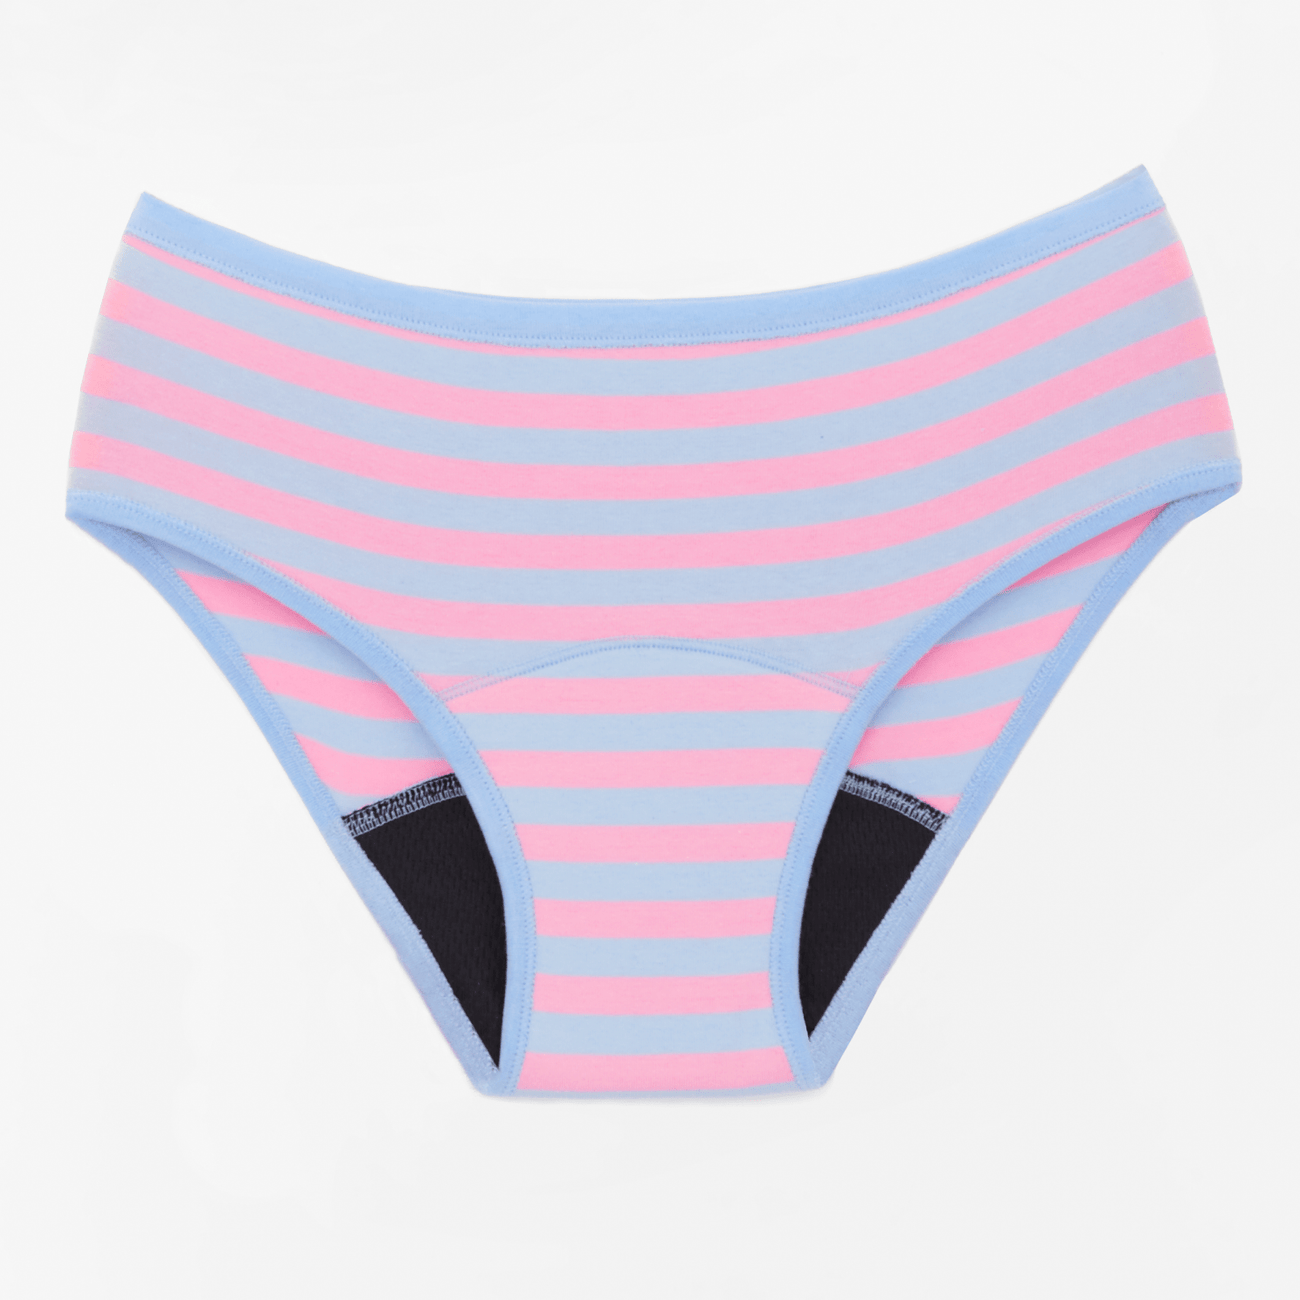 Teen - Organic cotton - Pink and blue